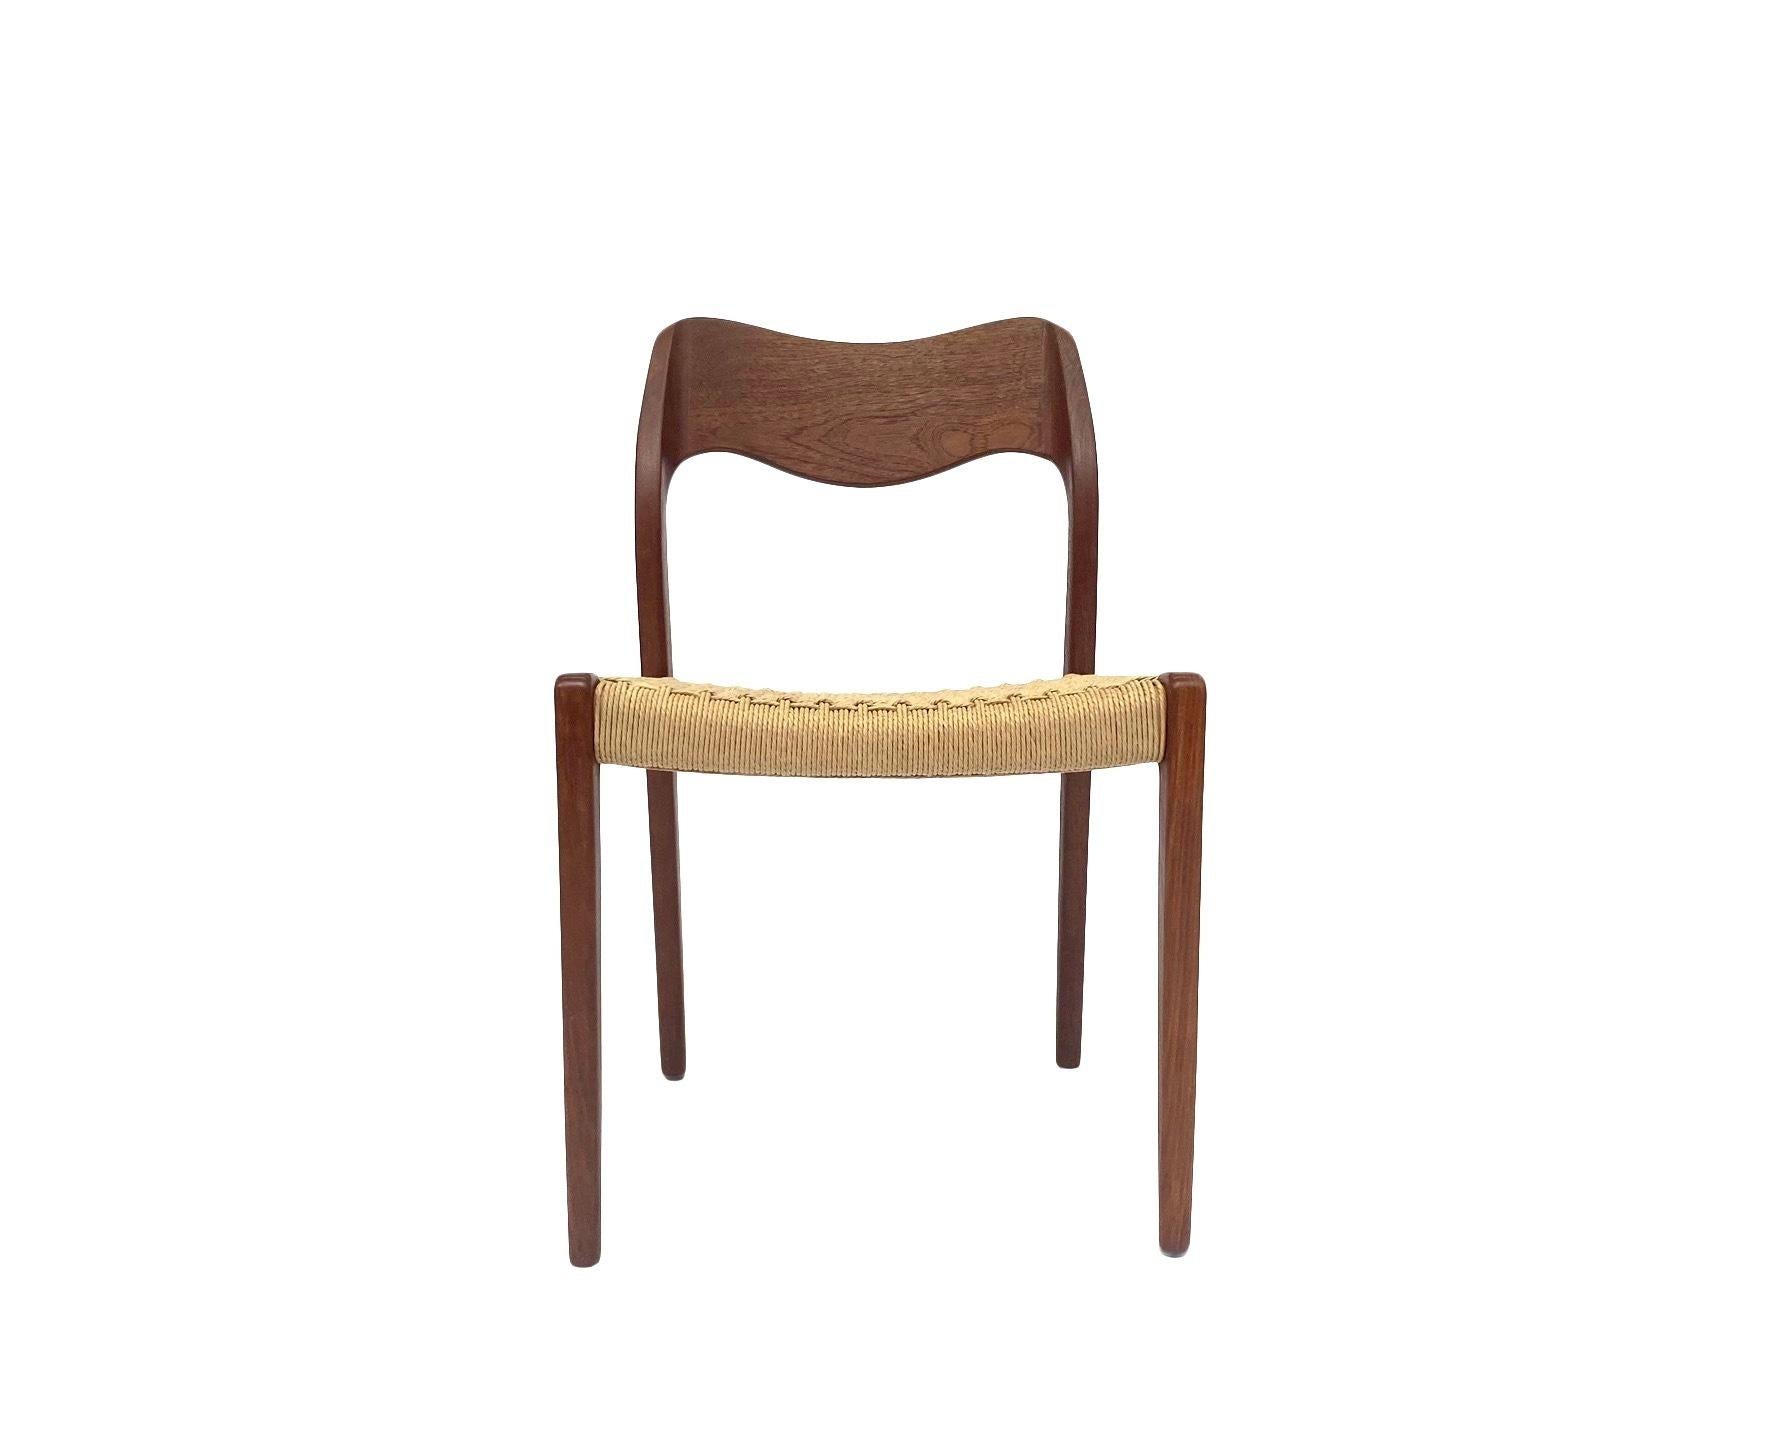 An iconic Model 71 teak and paper cord chair designed by Niels O. Møller for J.L Møllers in the 1950s, this would make a stylish addition to any dining or work area.

The chair has a wide hand woven paper cord seat pad and a sculptured ergonomic